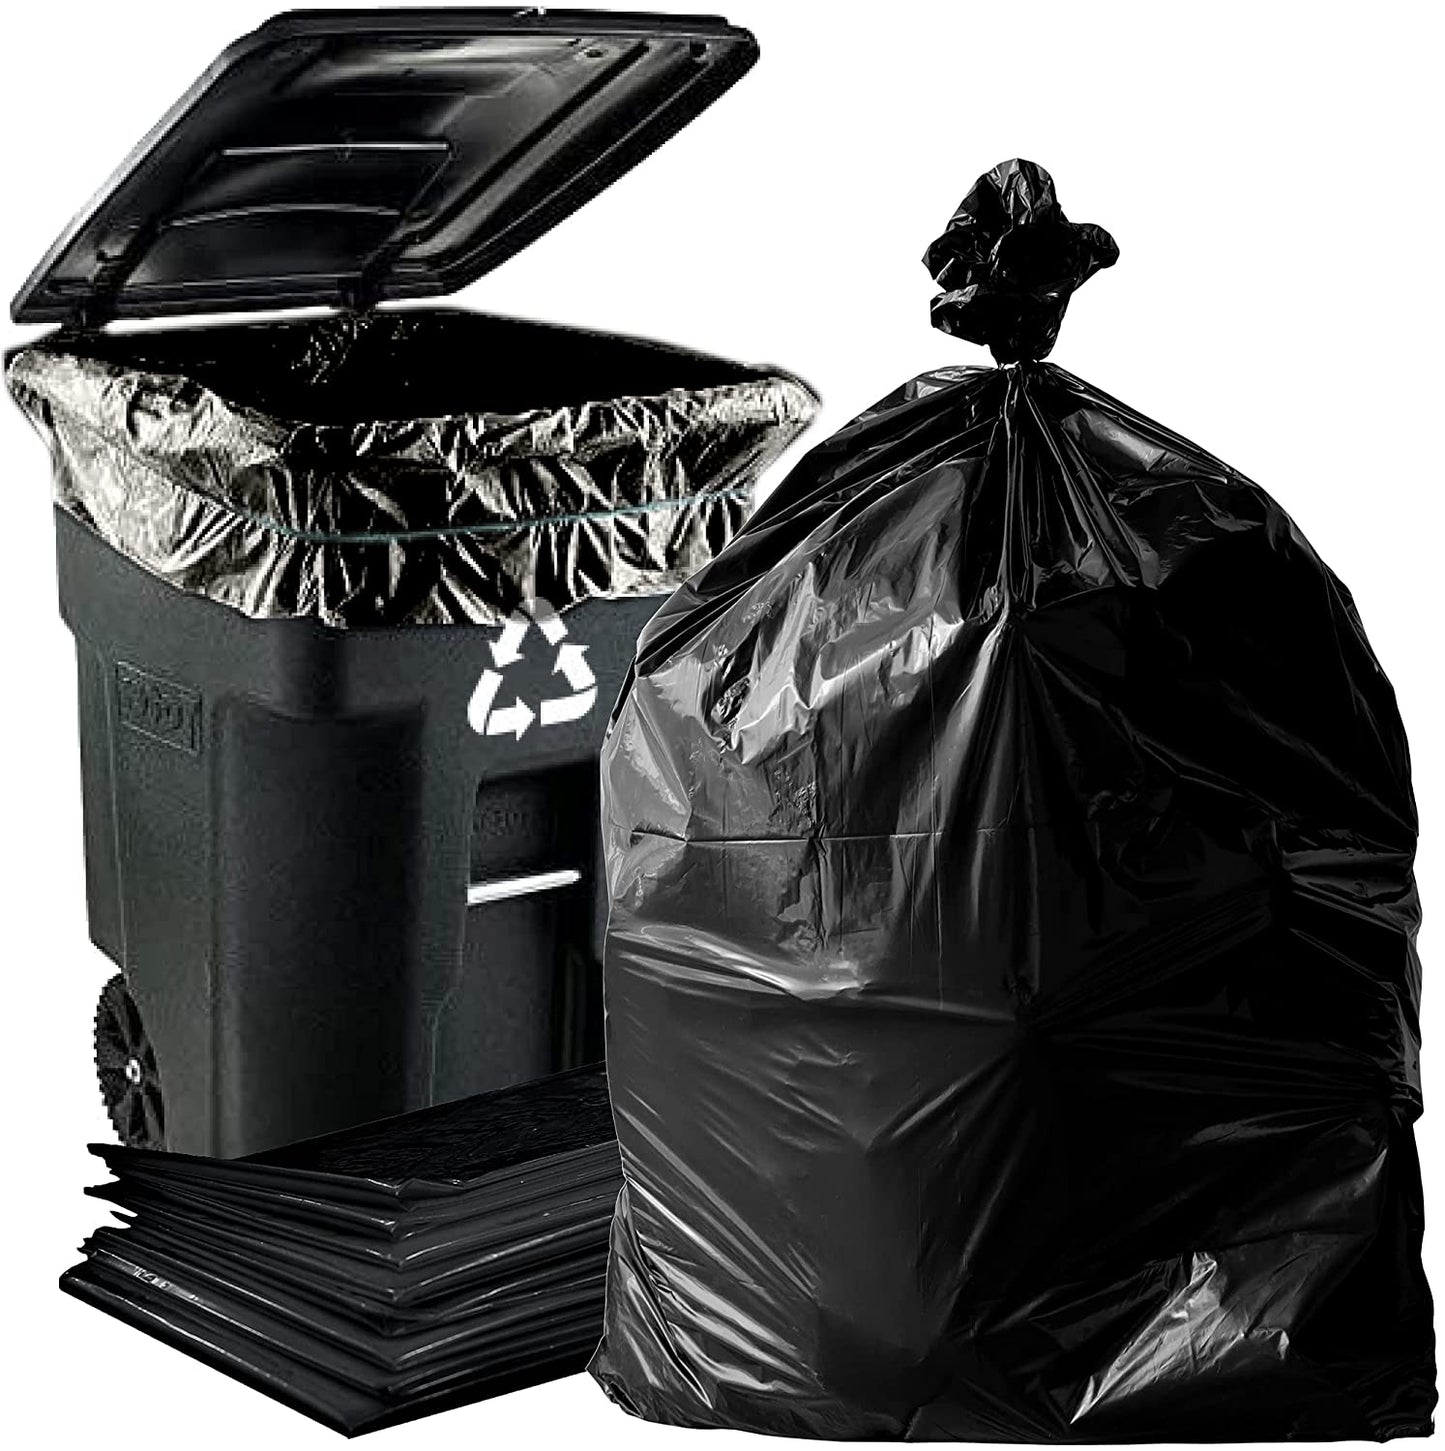 Dyno Products Online 65-Gallon, 1.5 Mil Thick Heavy-Duty Black Trash Bags - 50 Count Extra Large Plastic Garbage Liners Fit Huge Cans for Home Garden Lawn Yard Recycling Construction & Commercial Use